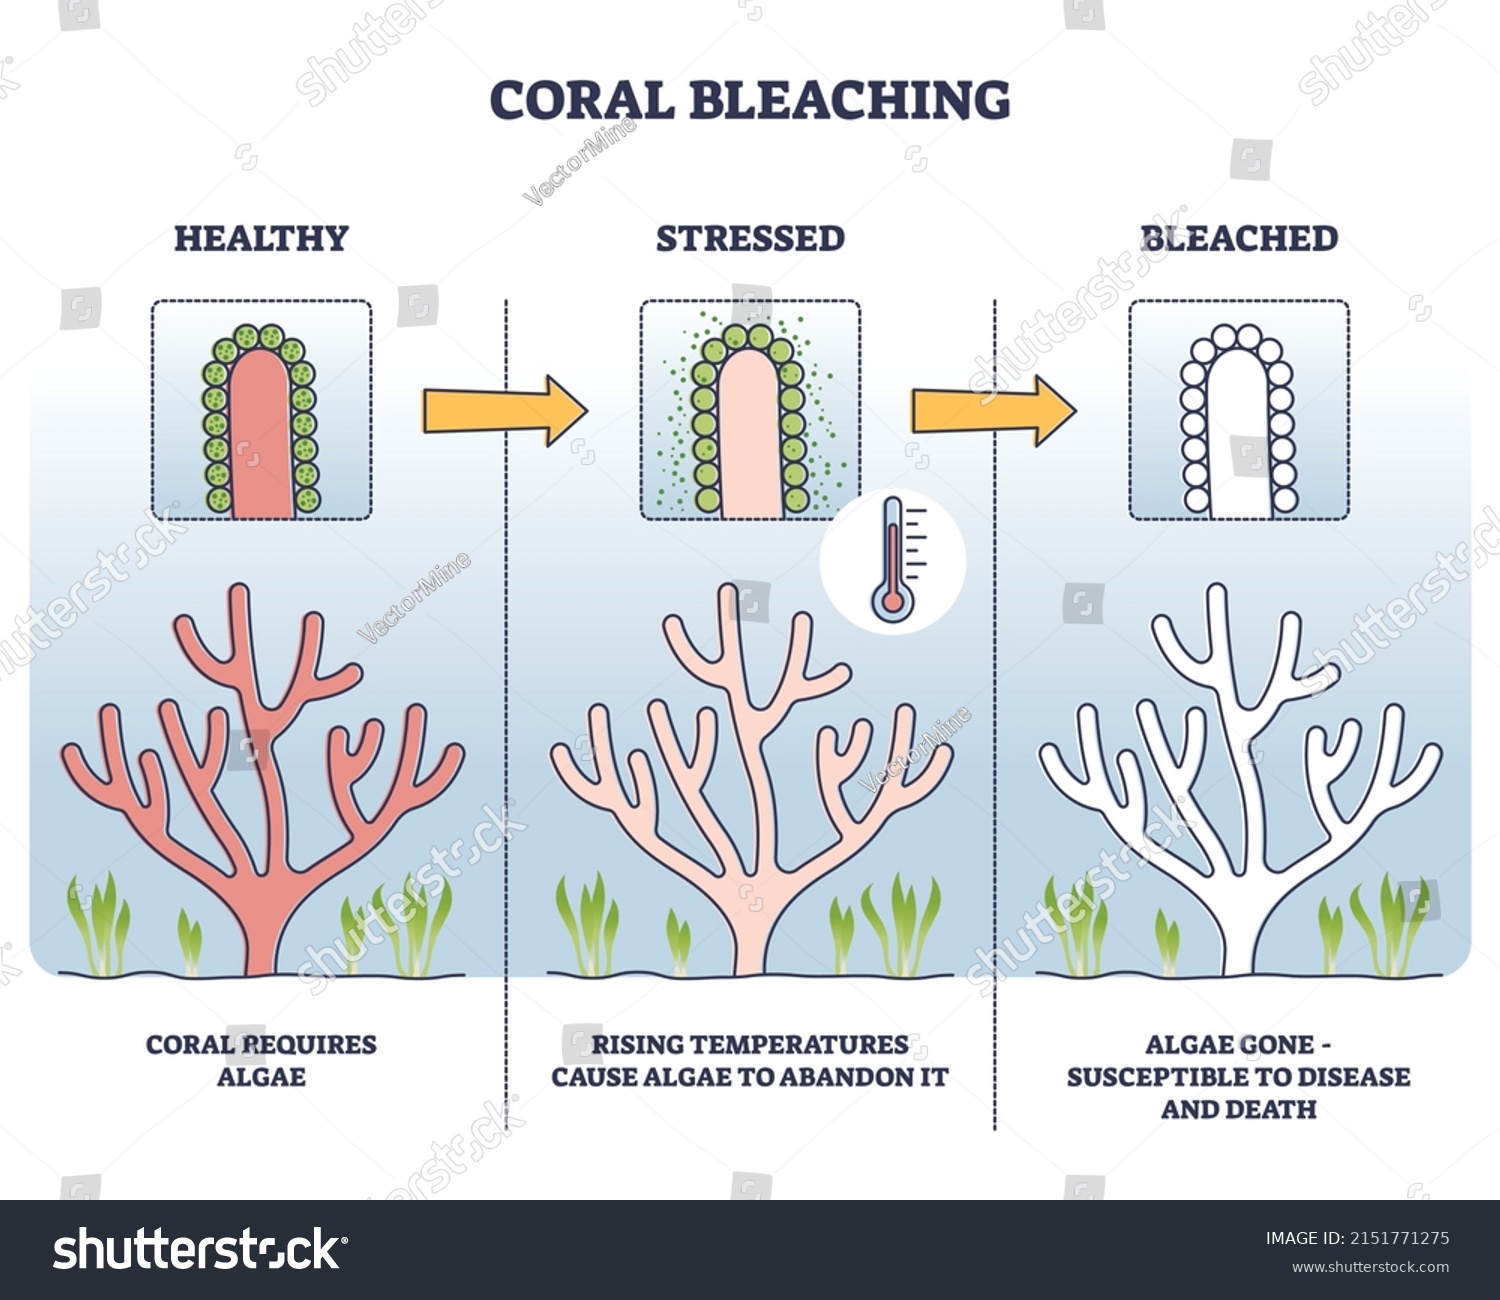 Coral bleaching process with healthy, stressed and bleached stages outline diagram. Labeled educational scheme with ecosystem problem and ocean warming dangers for fauna color vector illustration. #2151771275